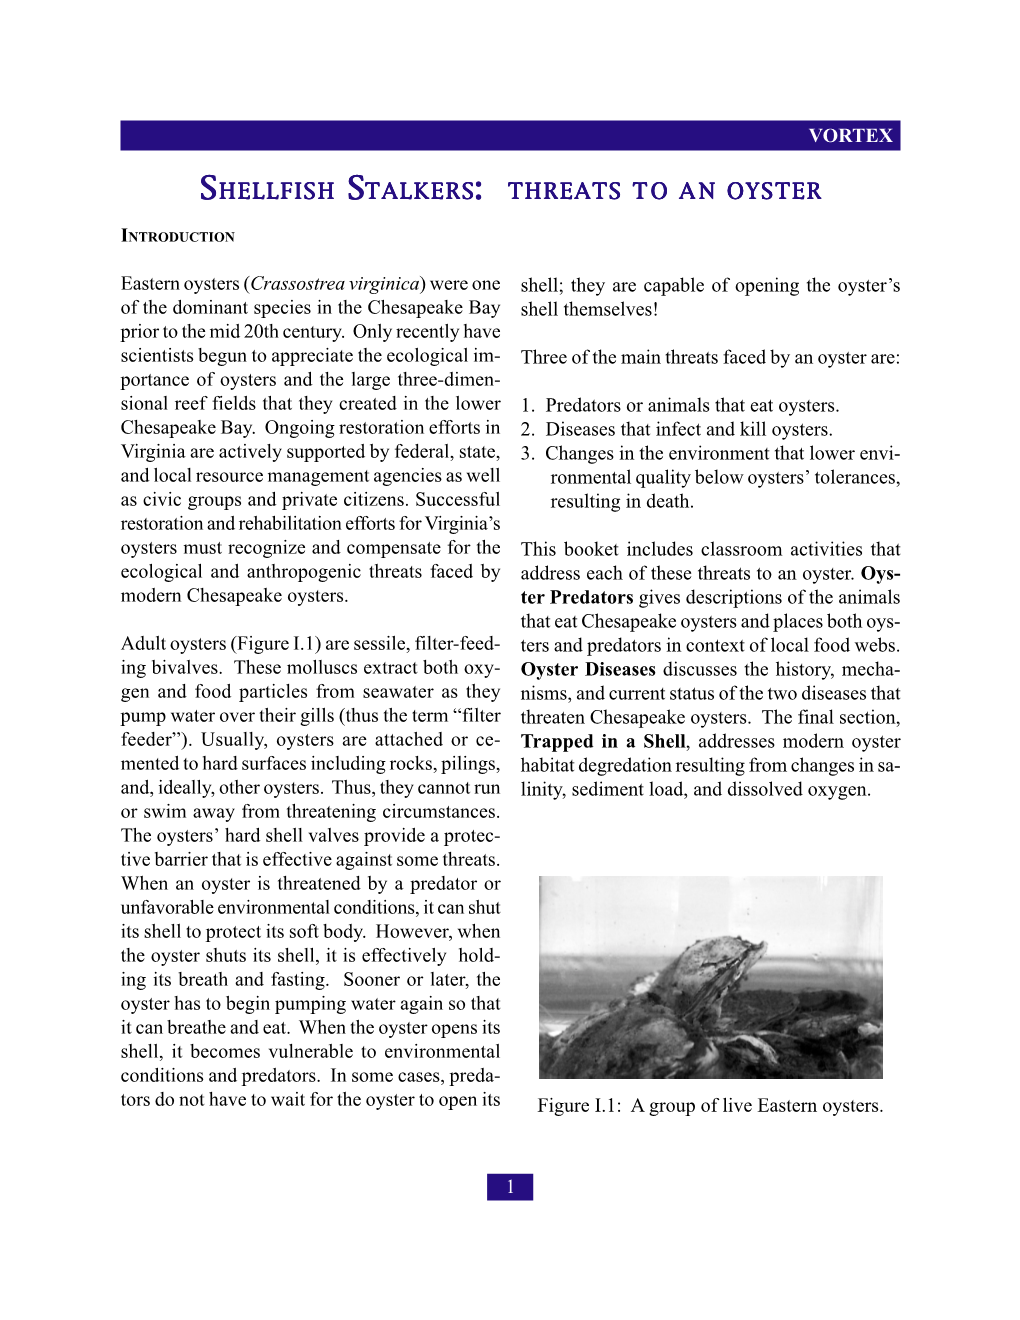 Shellfish Stalkers: Threats to an Oyster